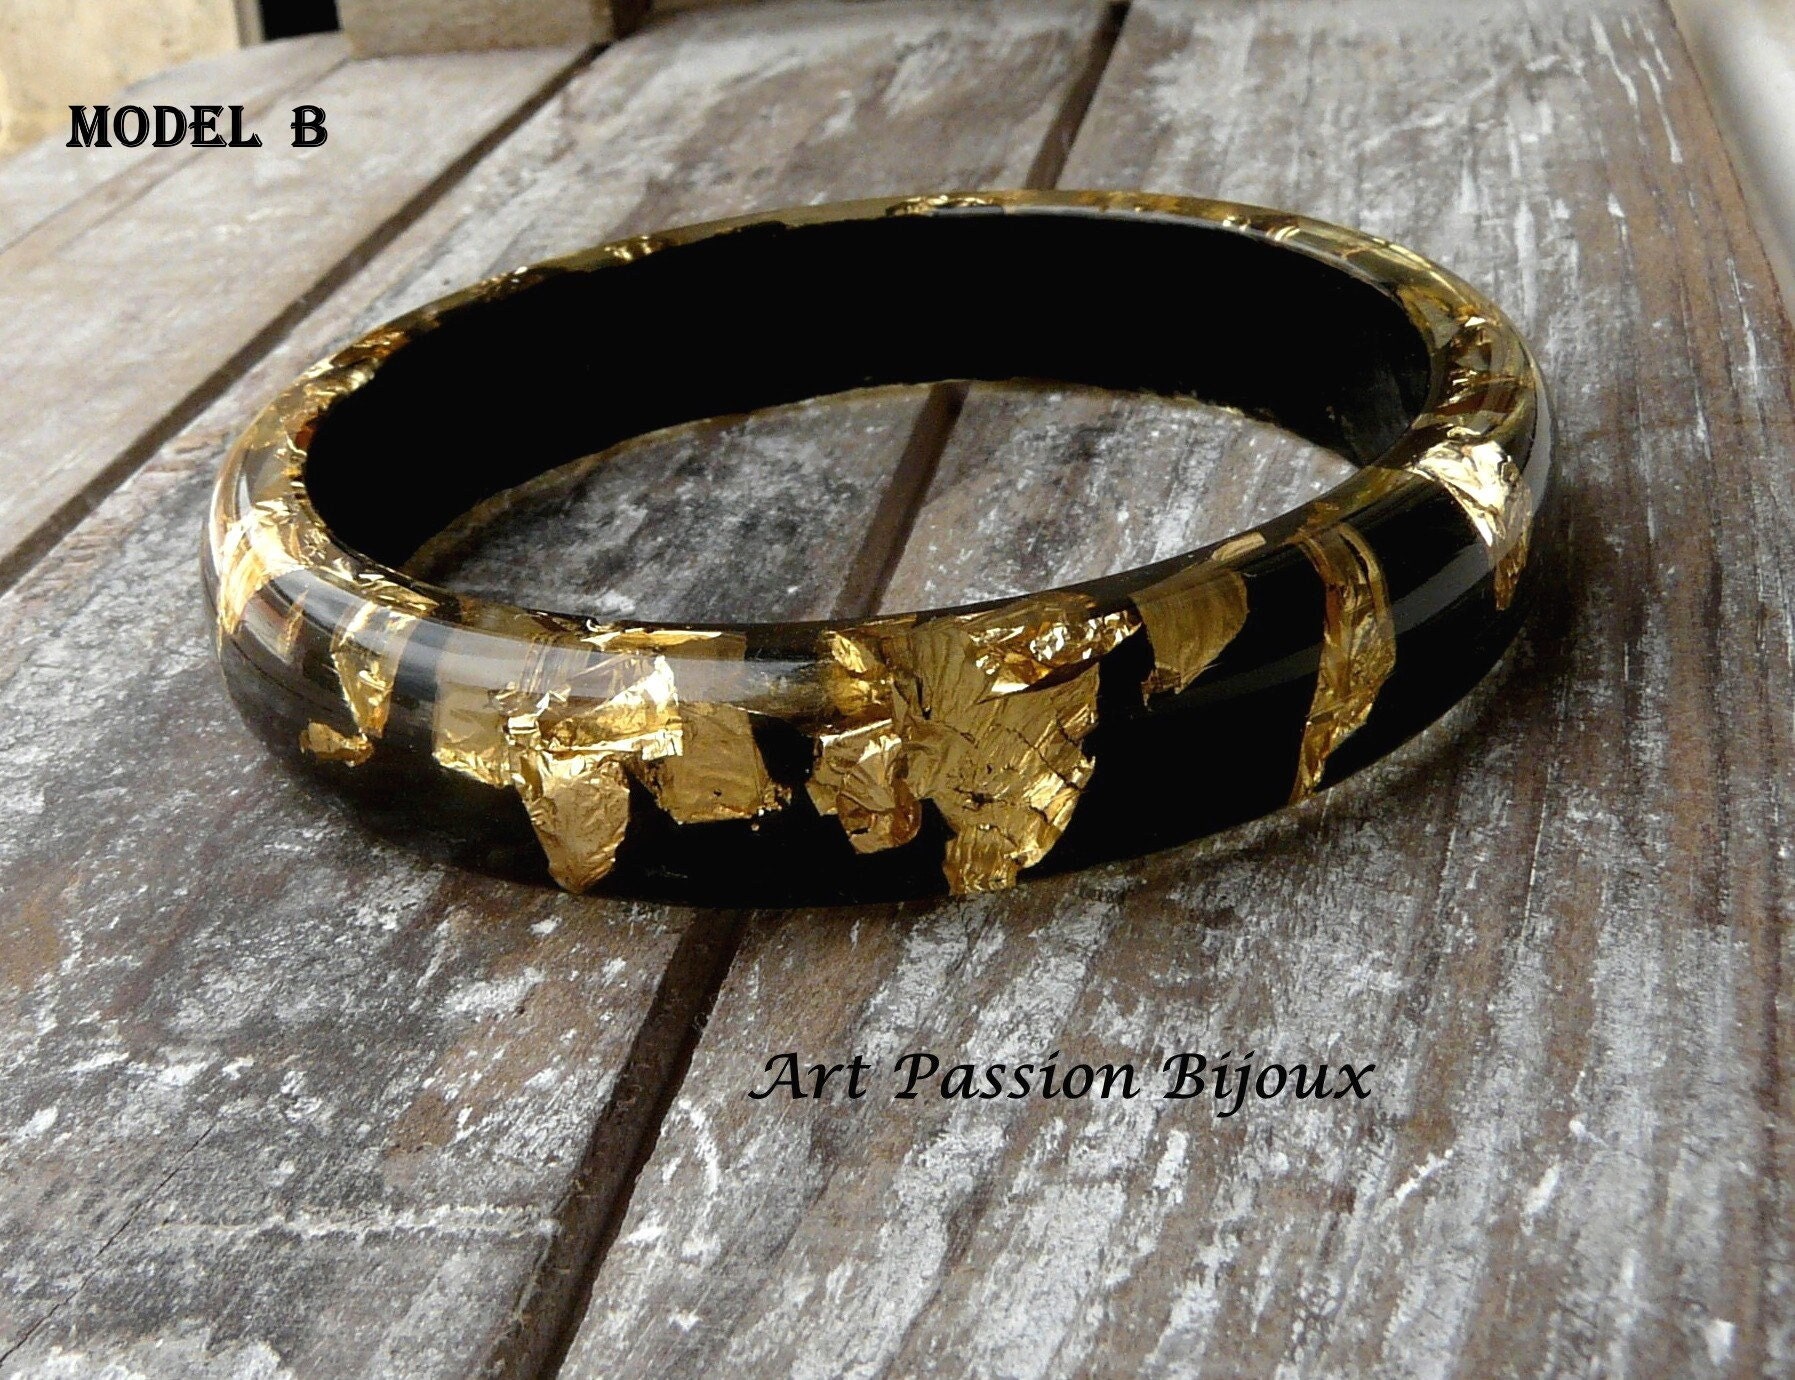 Clear Resin Bangle, Flower Resin Bracelet with Wooden, Pressed